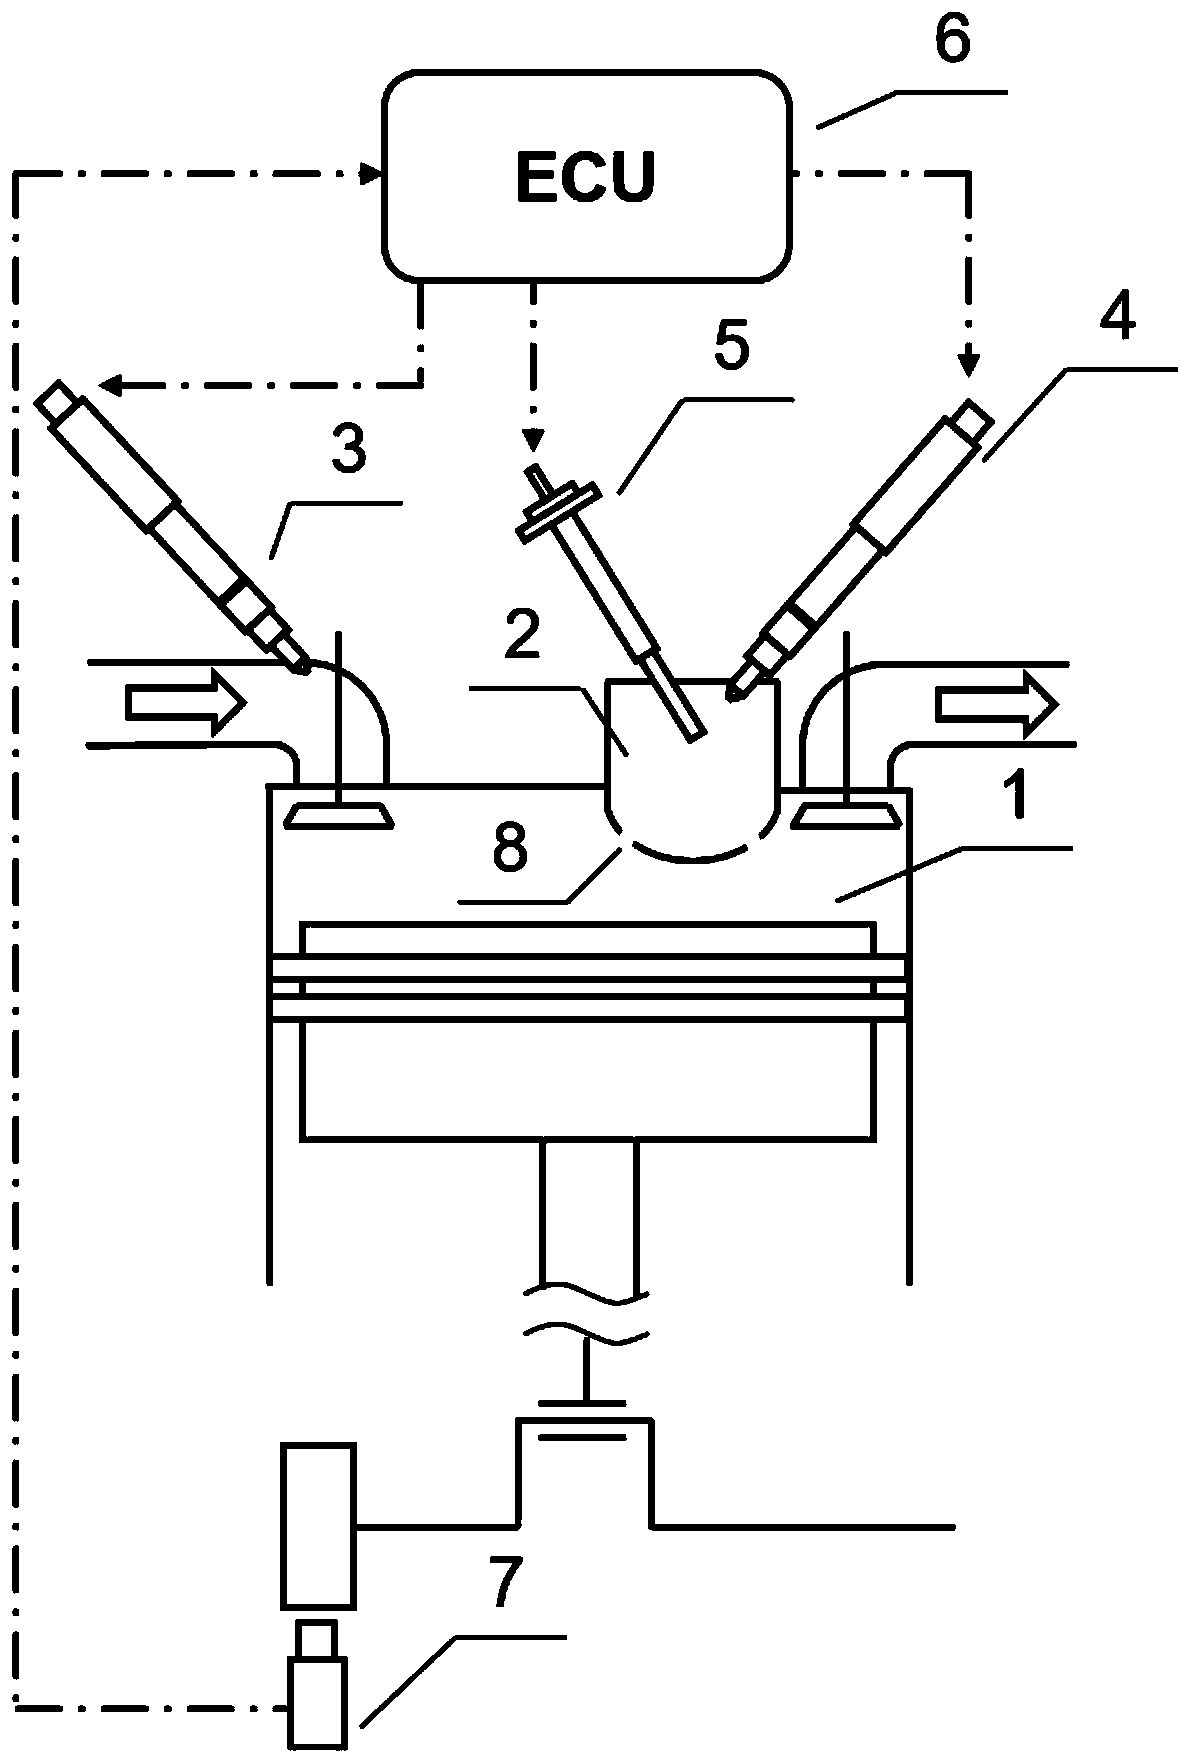 An engine with a secondary combustion chamber